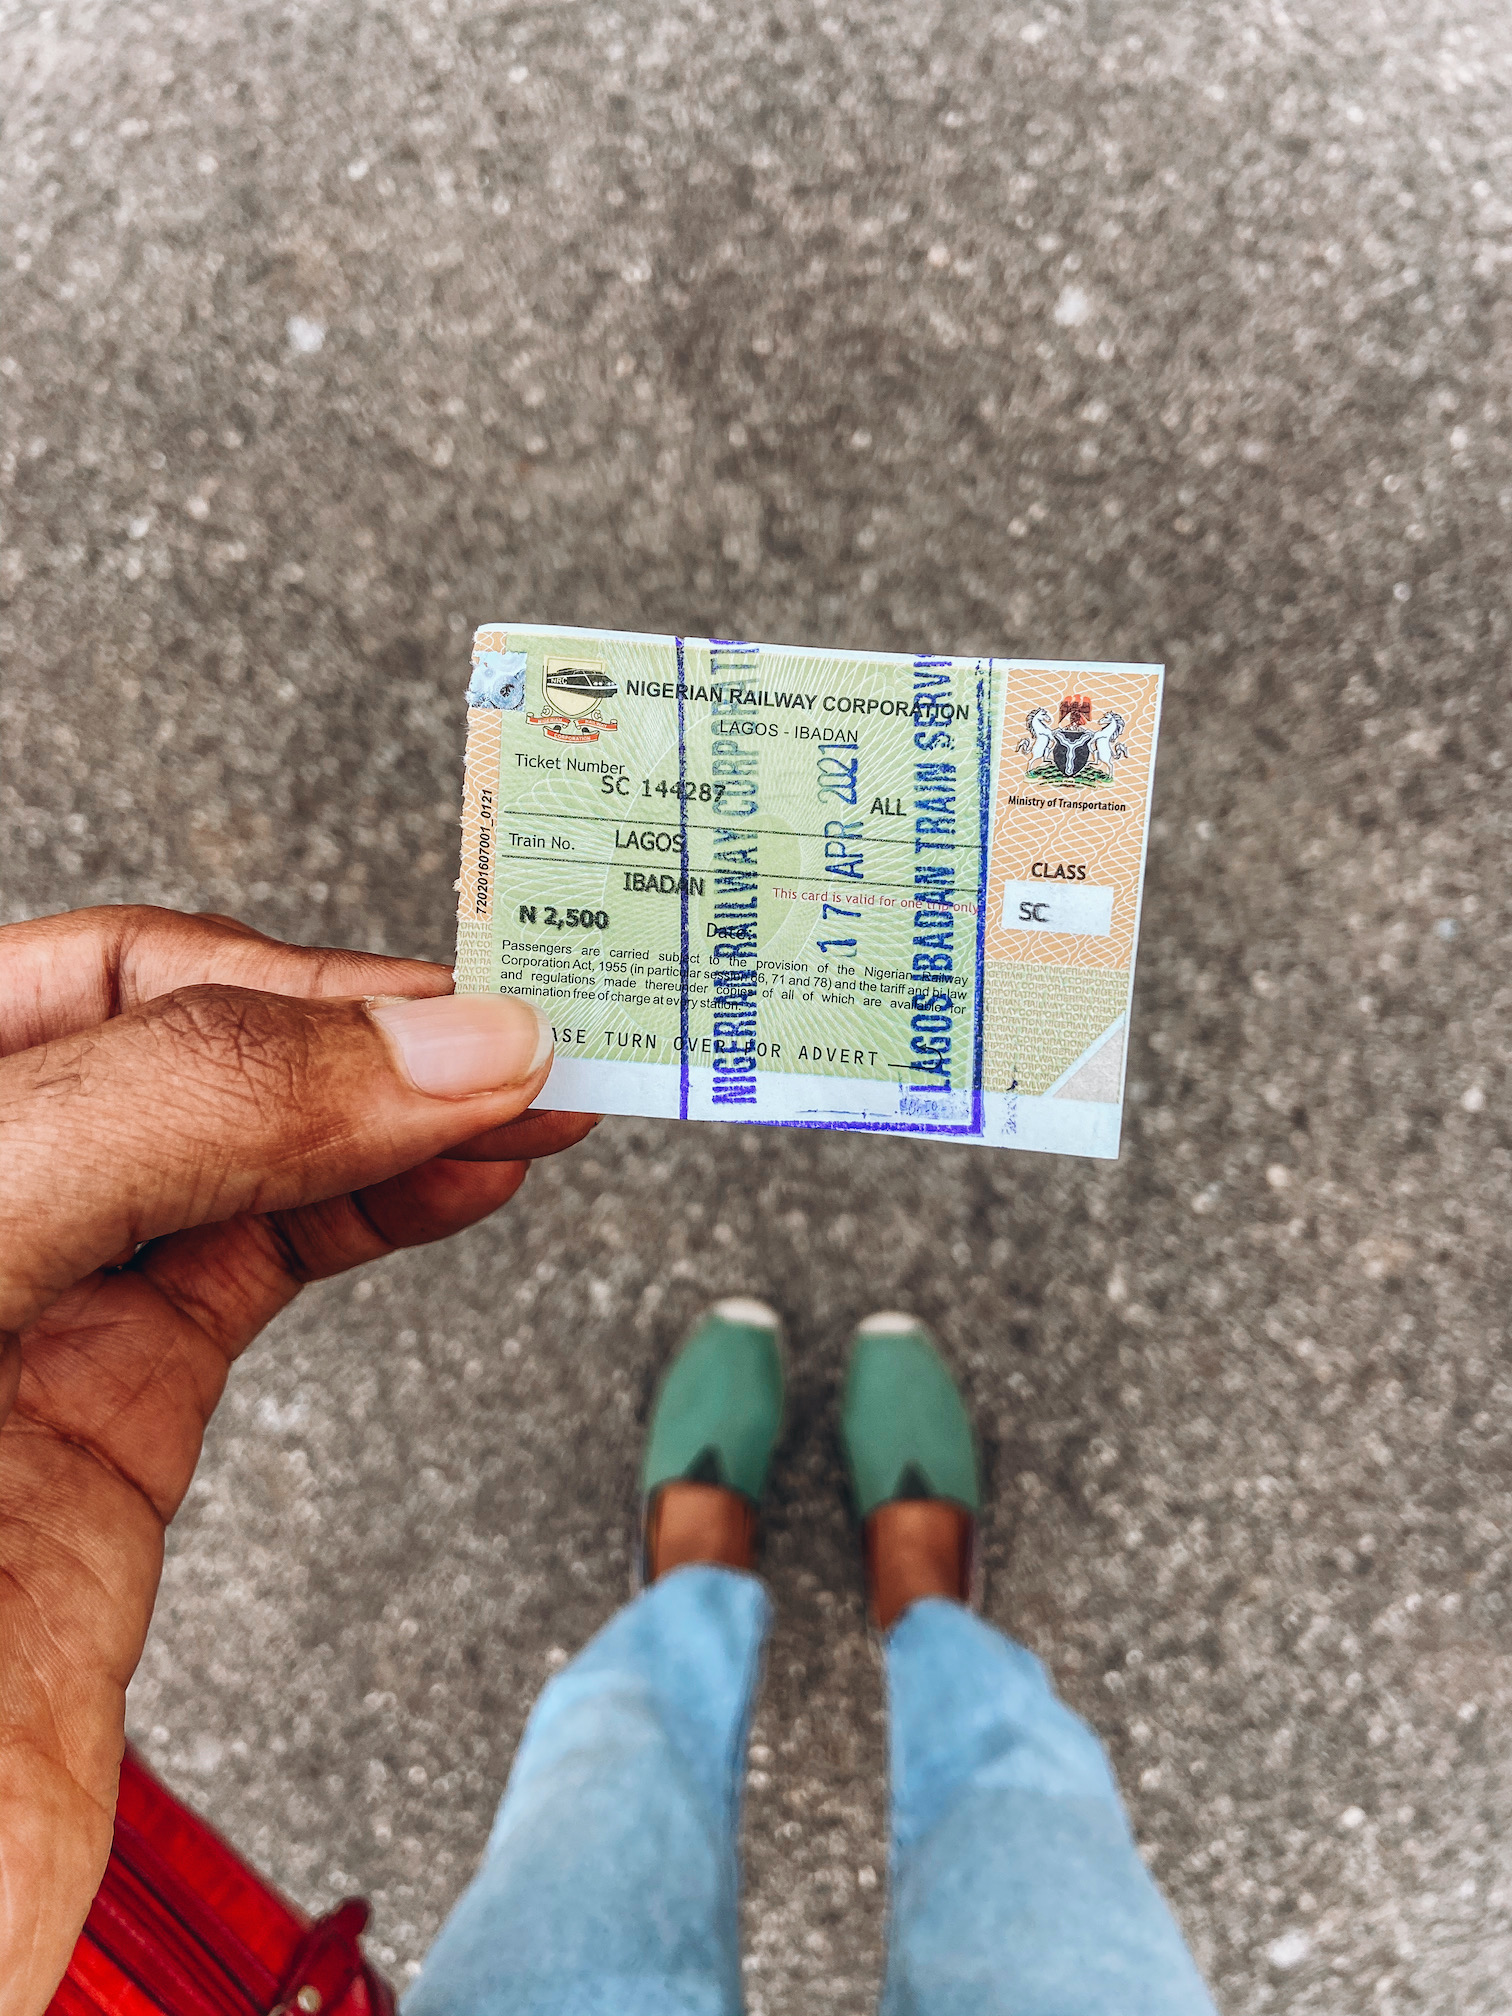 Train ticket from lagos to ibadan